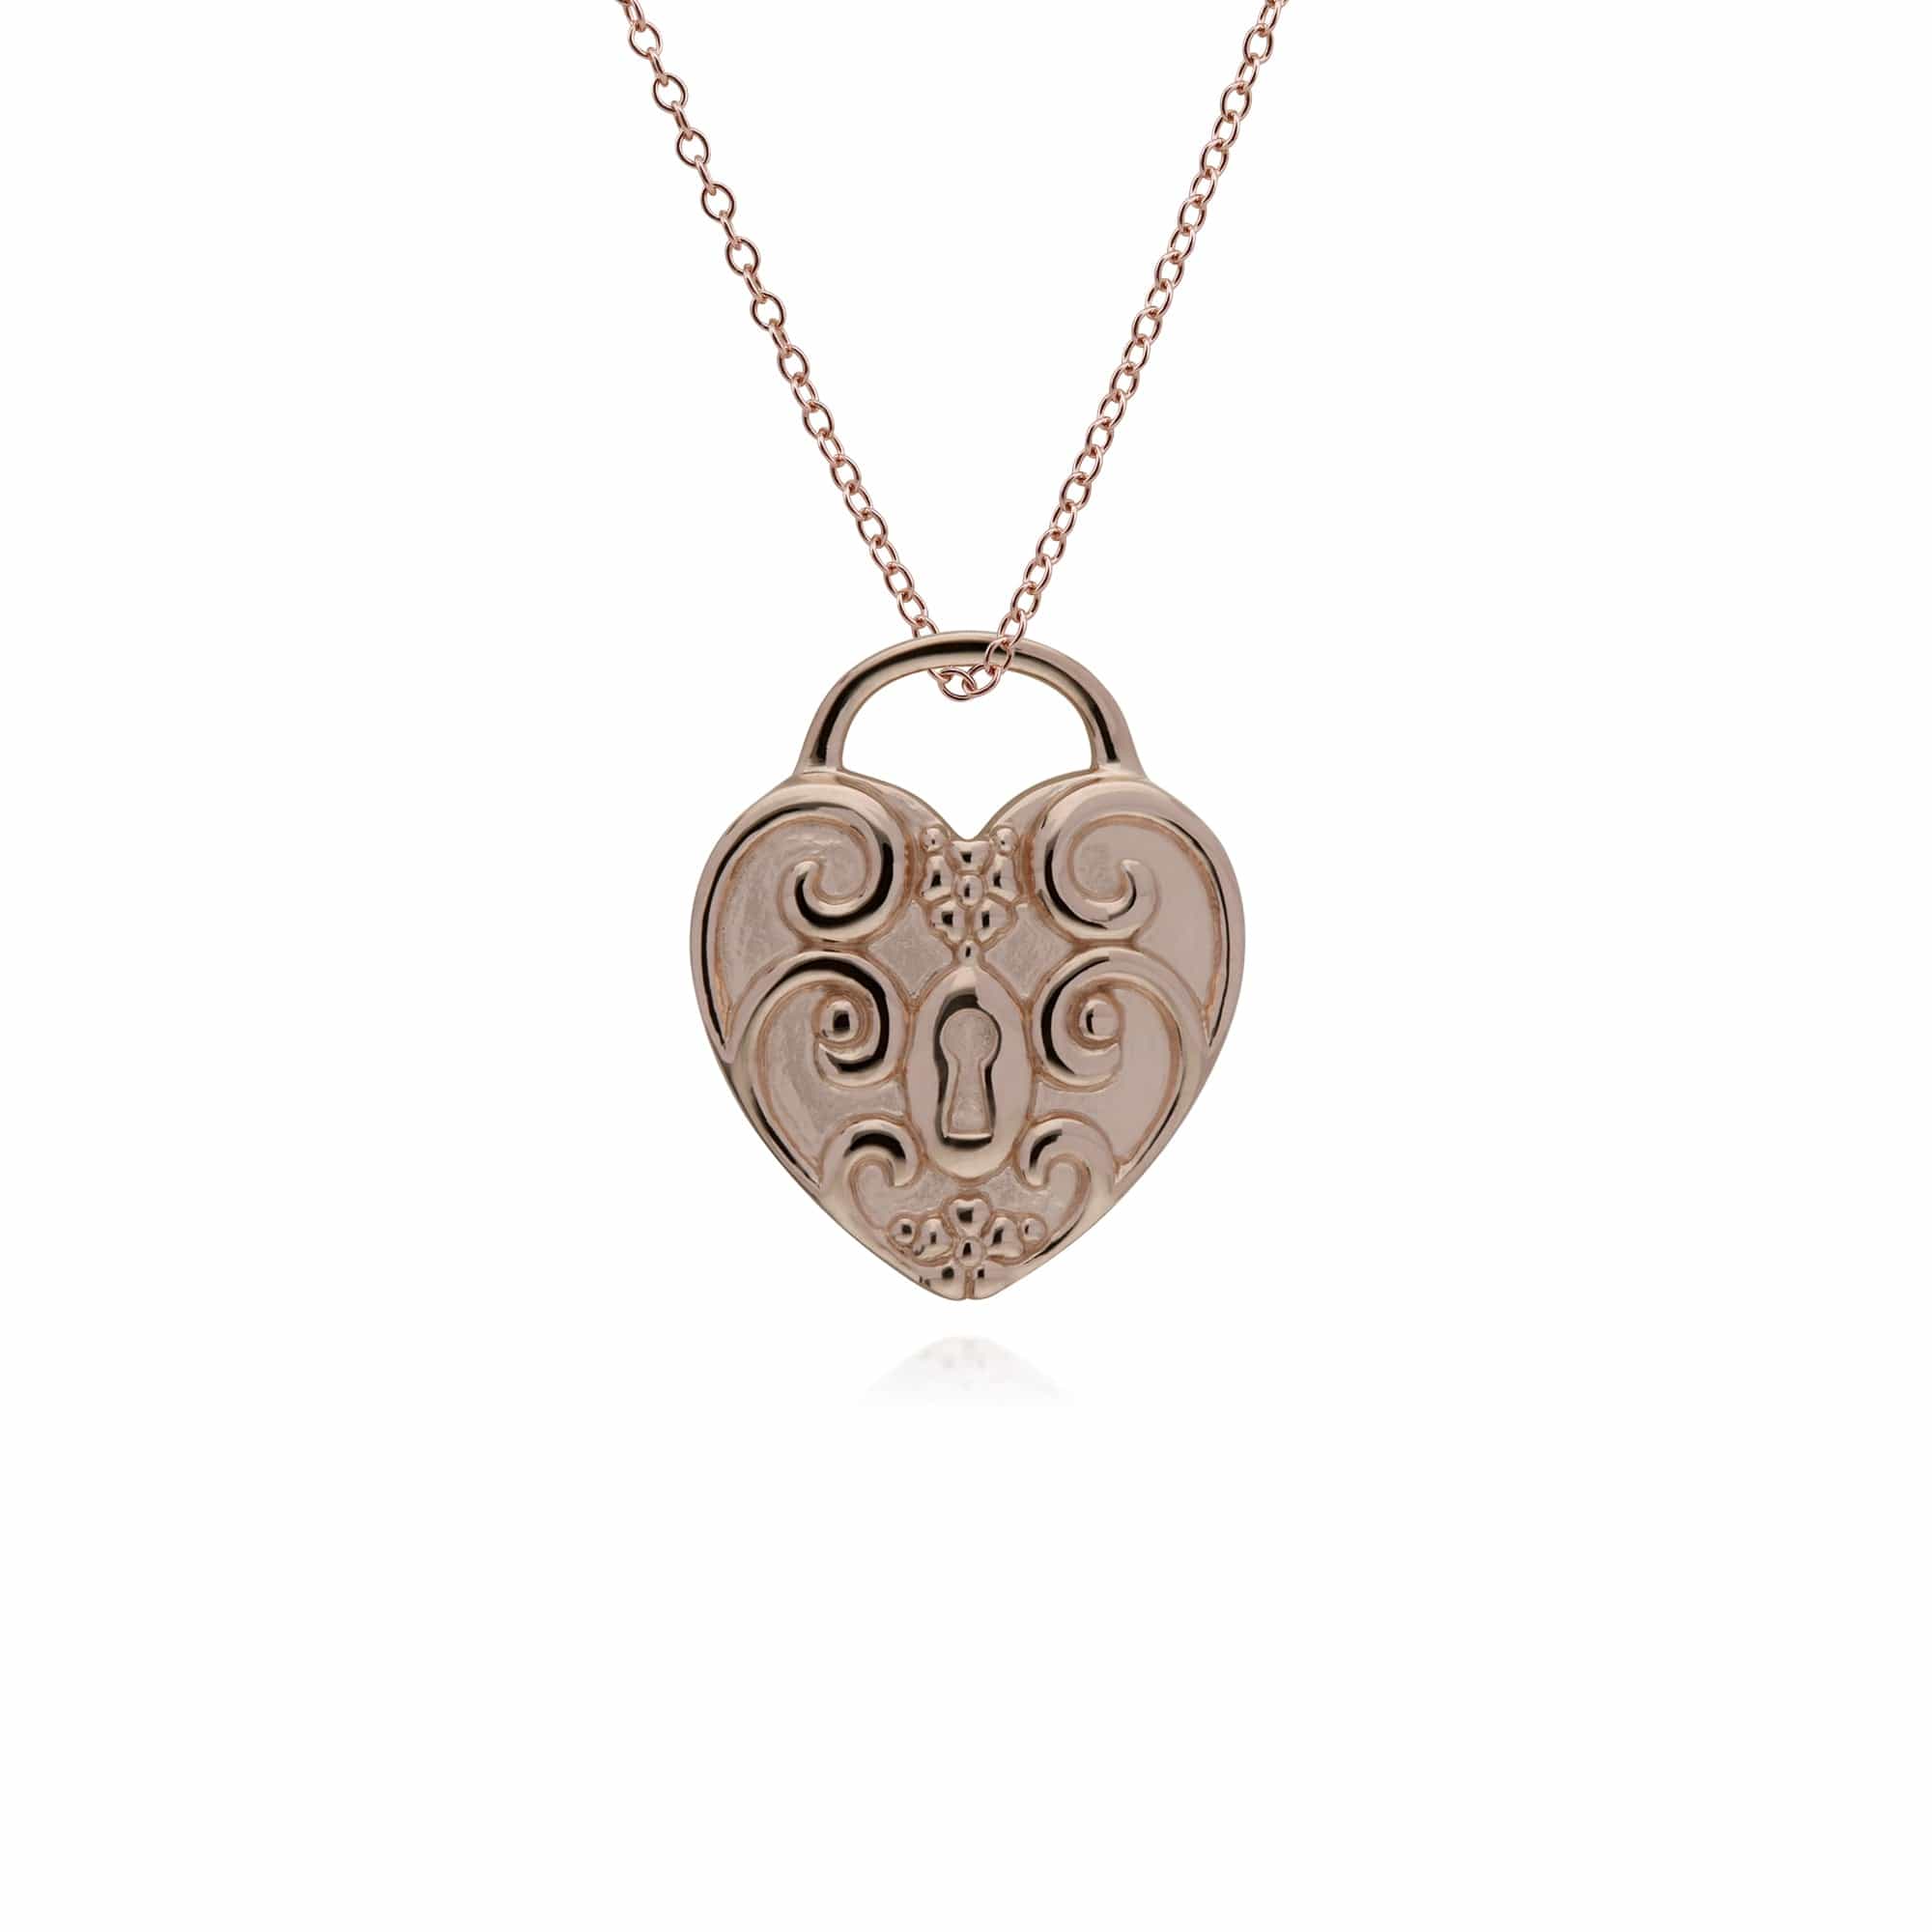 270P027307925-270P026501925 Classic Swirl Heart Lock Pendant & Aquamarine Charm in Rose Gold Plated 925 Sterling Silver 3